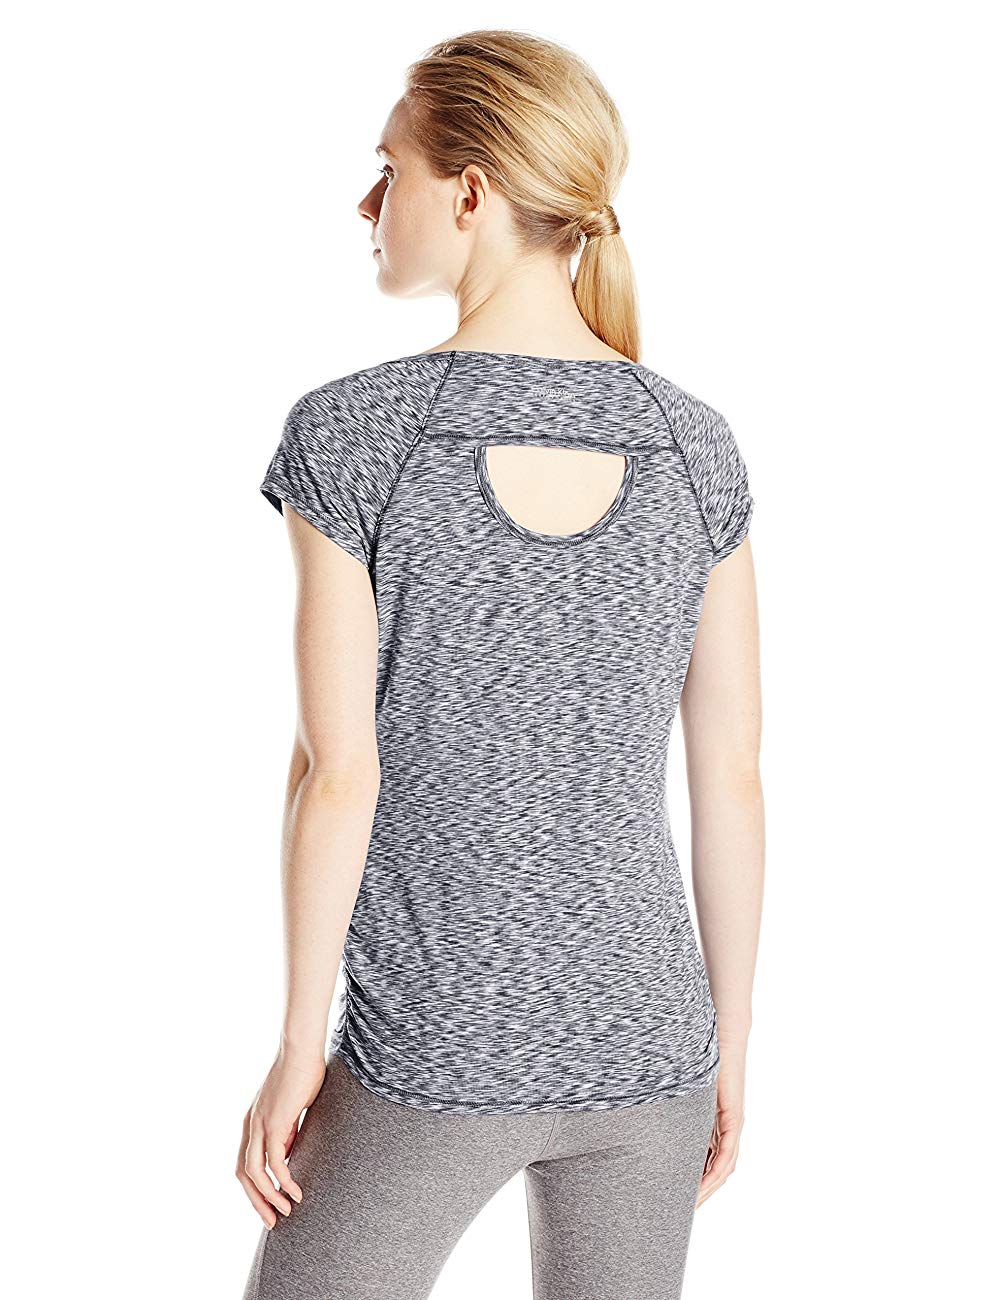 Calvin Klein Womens Space-Dyed Top